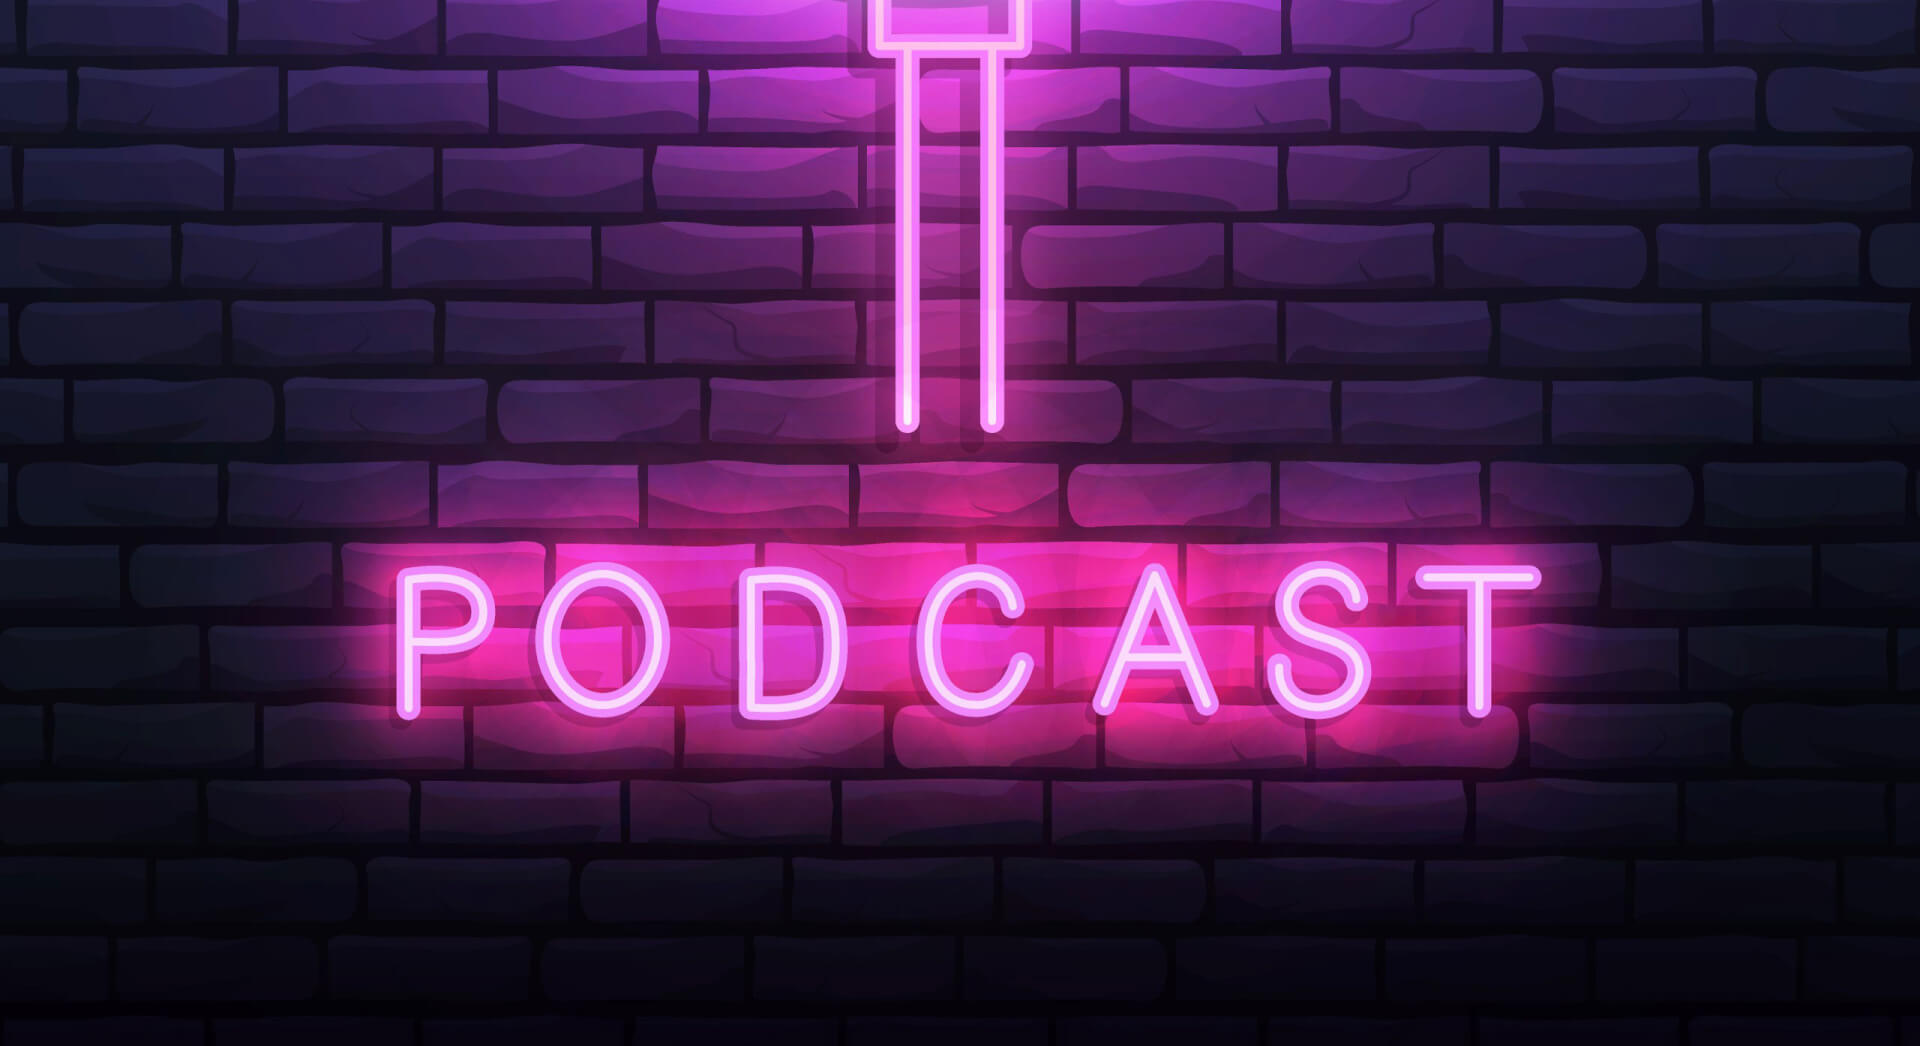 The word "podcast" in pink neon lights